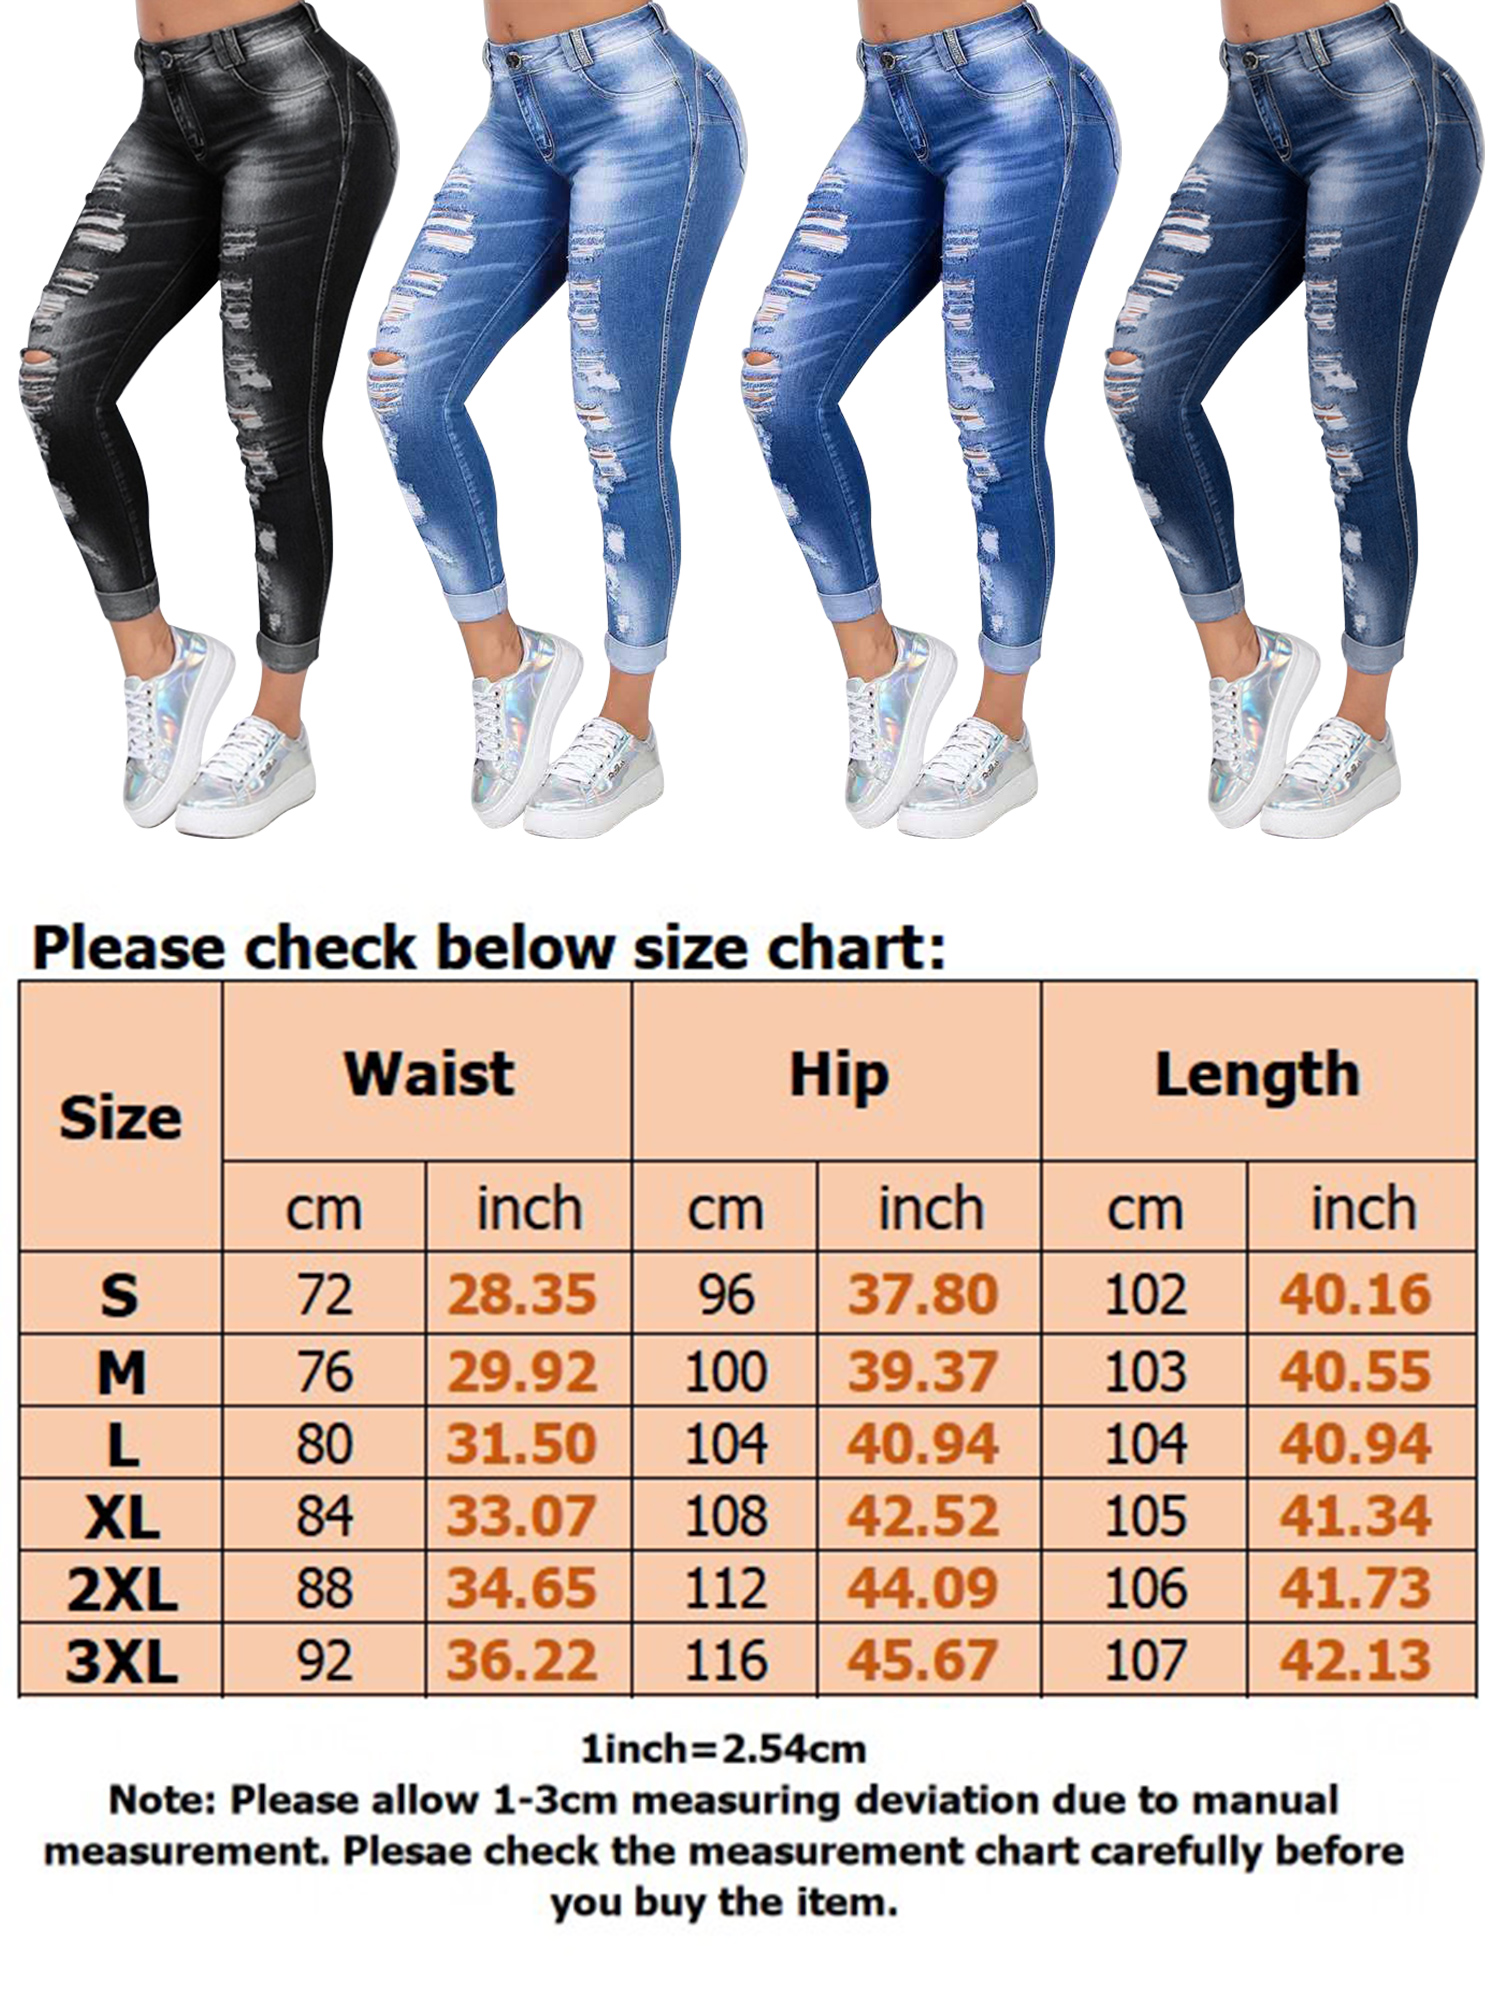 Ripped Distressed Jeans For Women Mid Rise Skinny Slim Fit Jeans Ladies Cut Denim Trouser Pants For Juniors - image 2 of 3